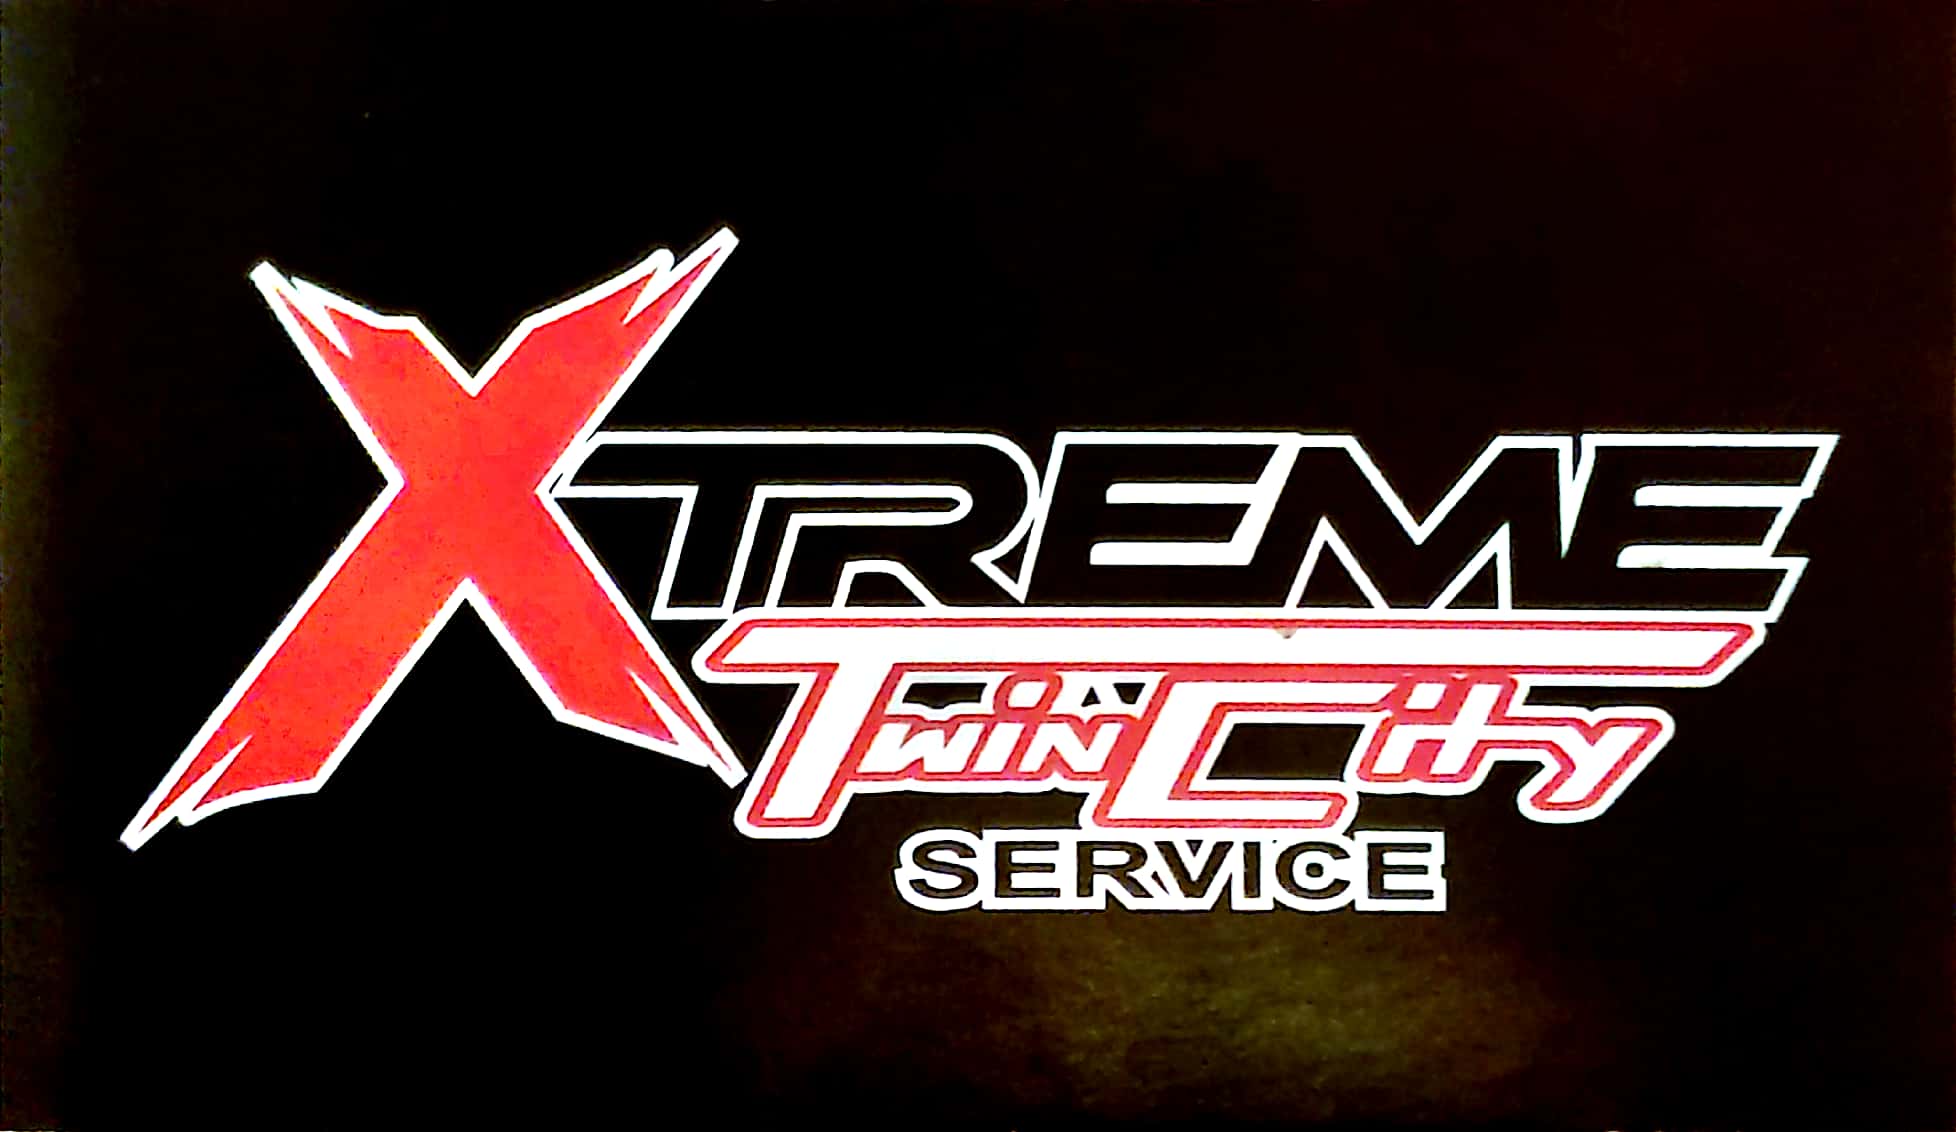 Twin City Xtreme Towing/Tilt & Load Services Guelph  DriveLink.ca